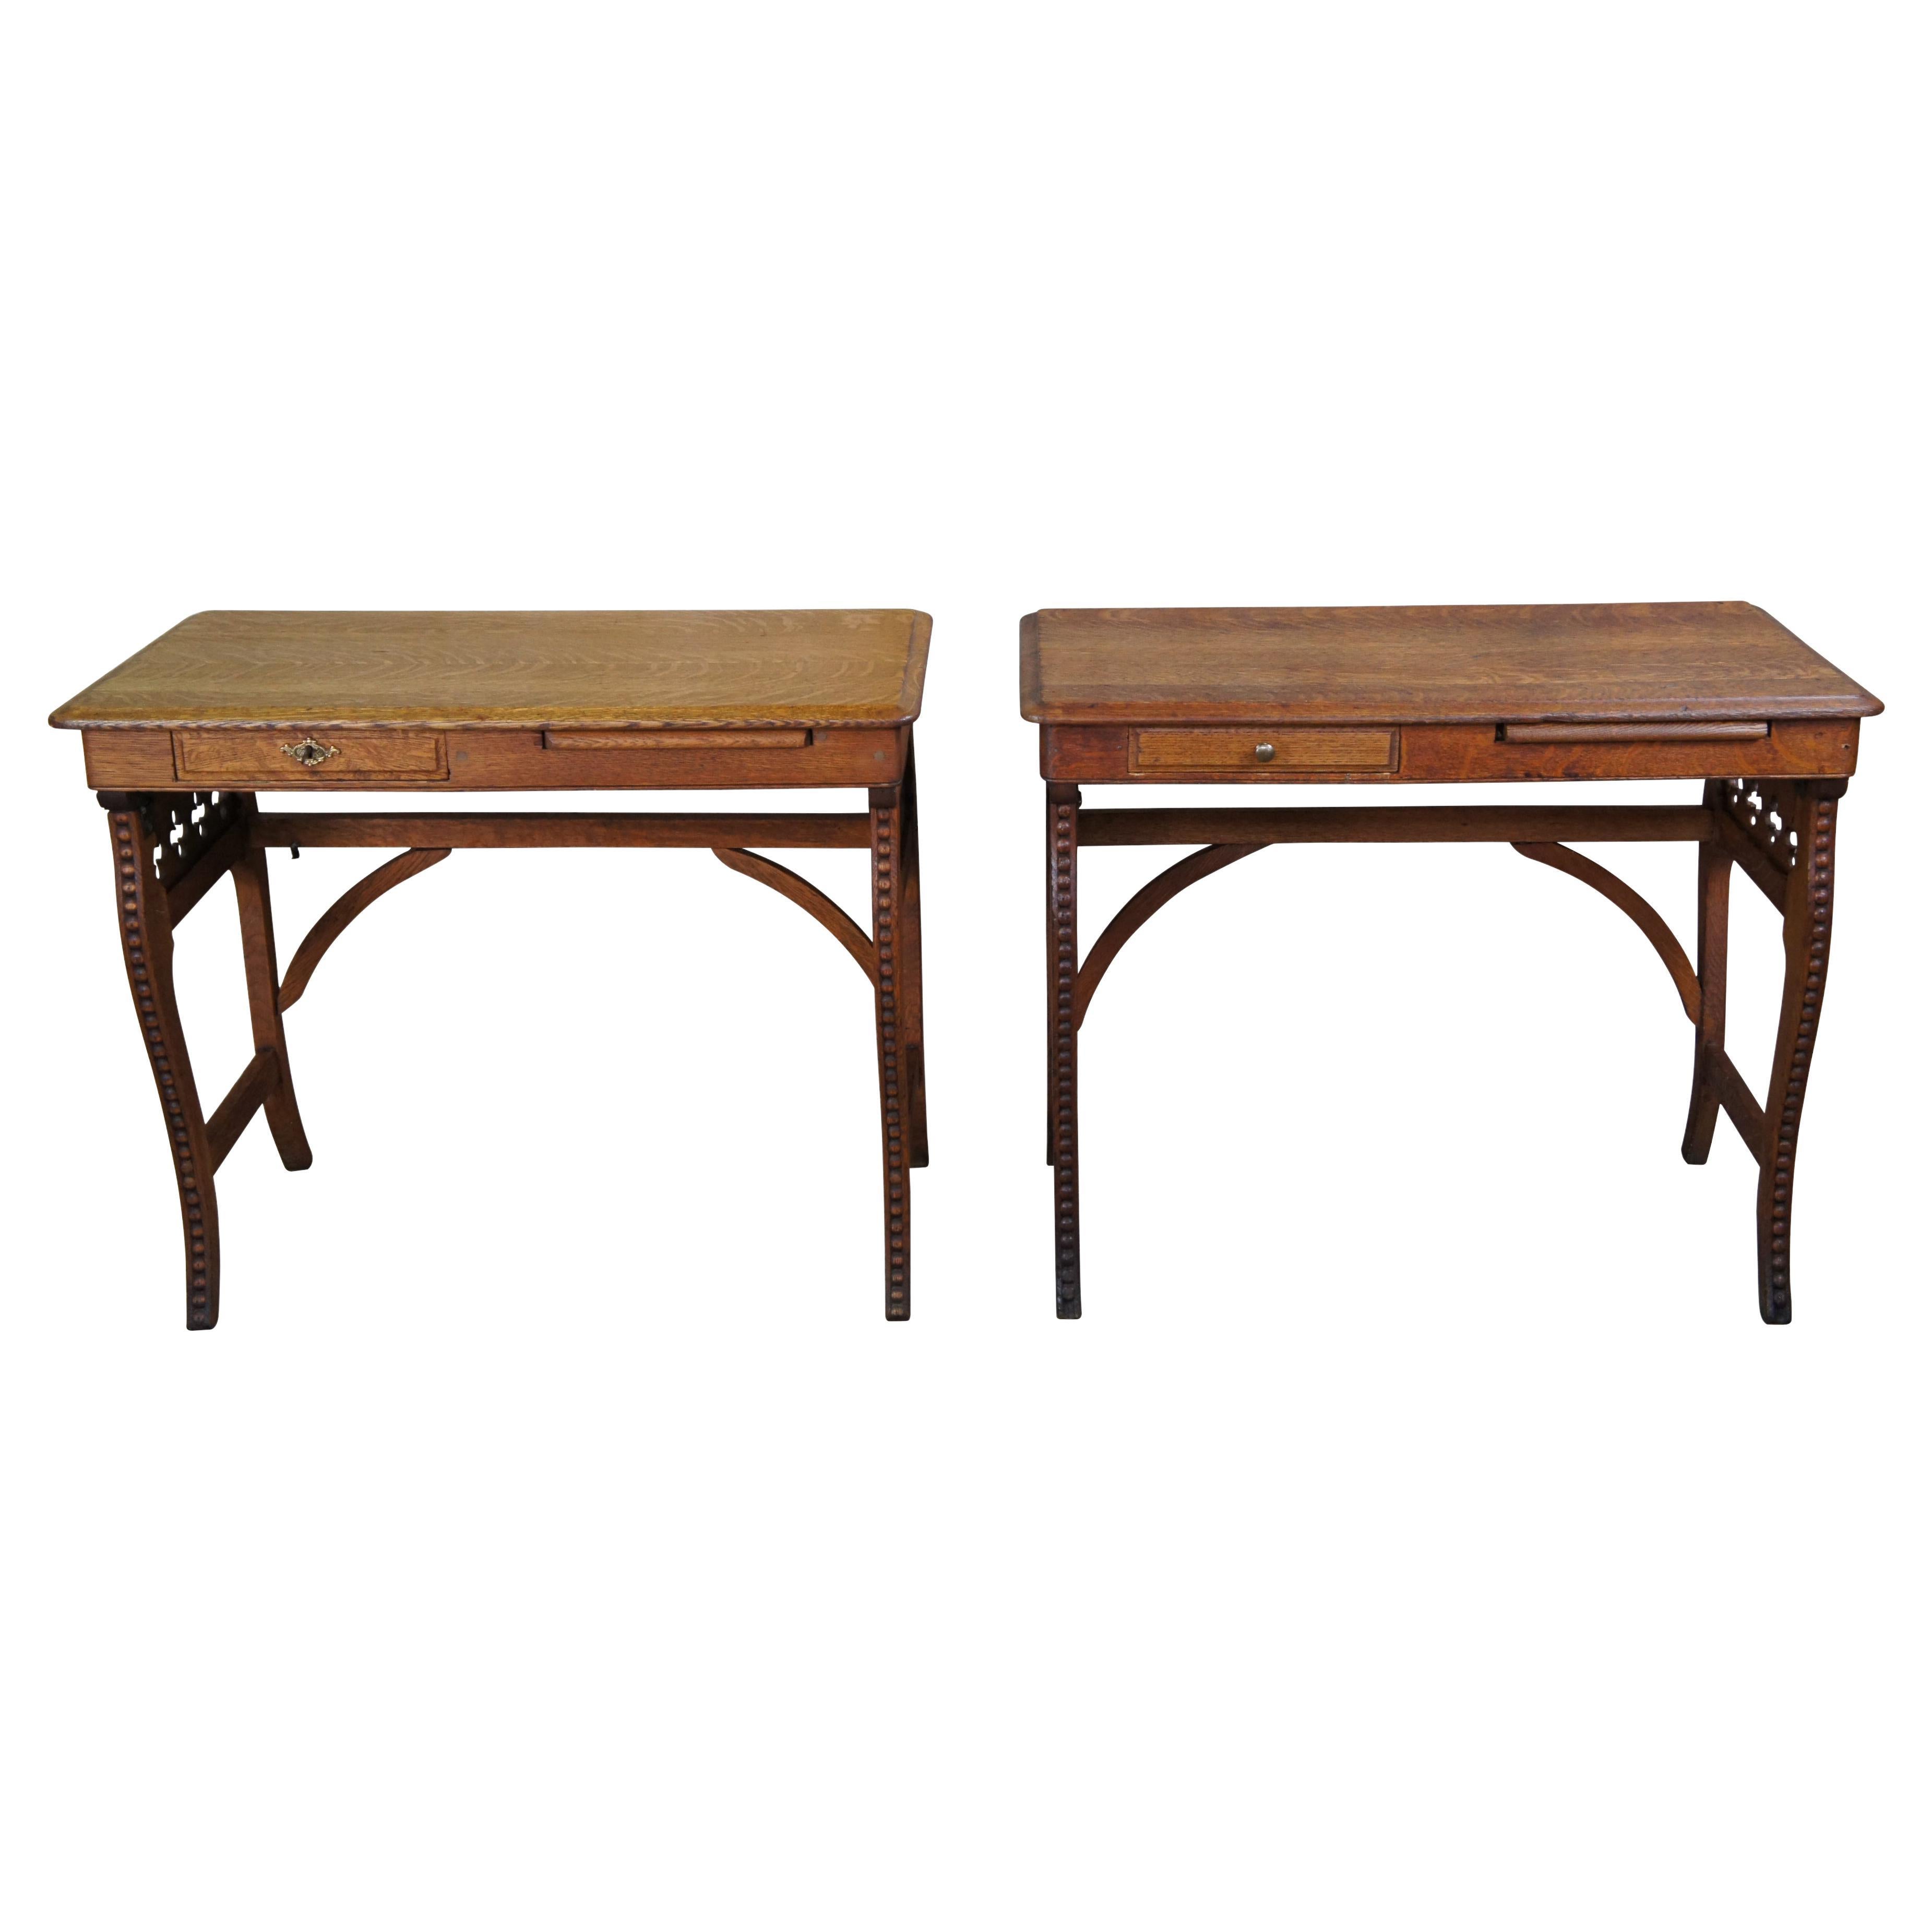 Pair of two antique Victorian Arts & Crafts folding Campaign desks. Made of quartersawn oak featuring Gothic quatrefoil and beaded carved accents with drawer and pull out writing surface. Neatly folds for travel.

Measures: 17.75